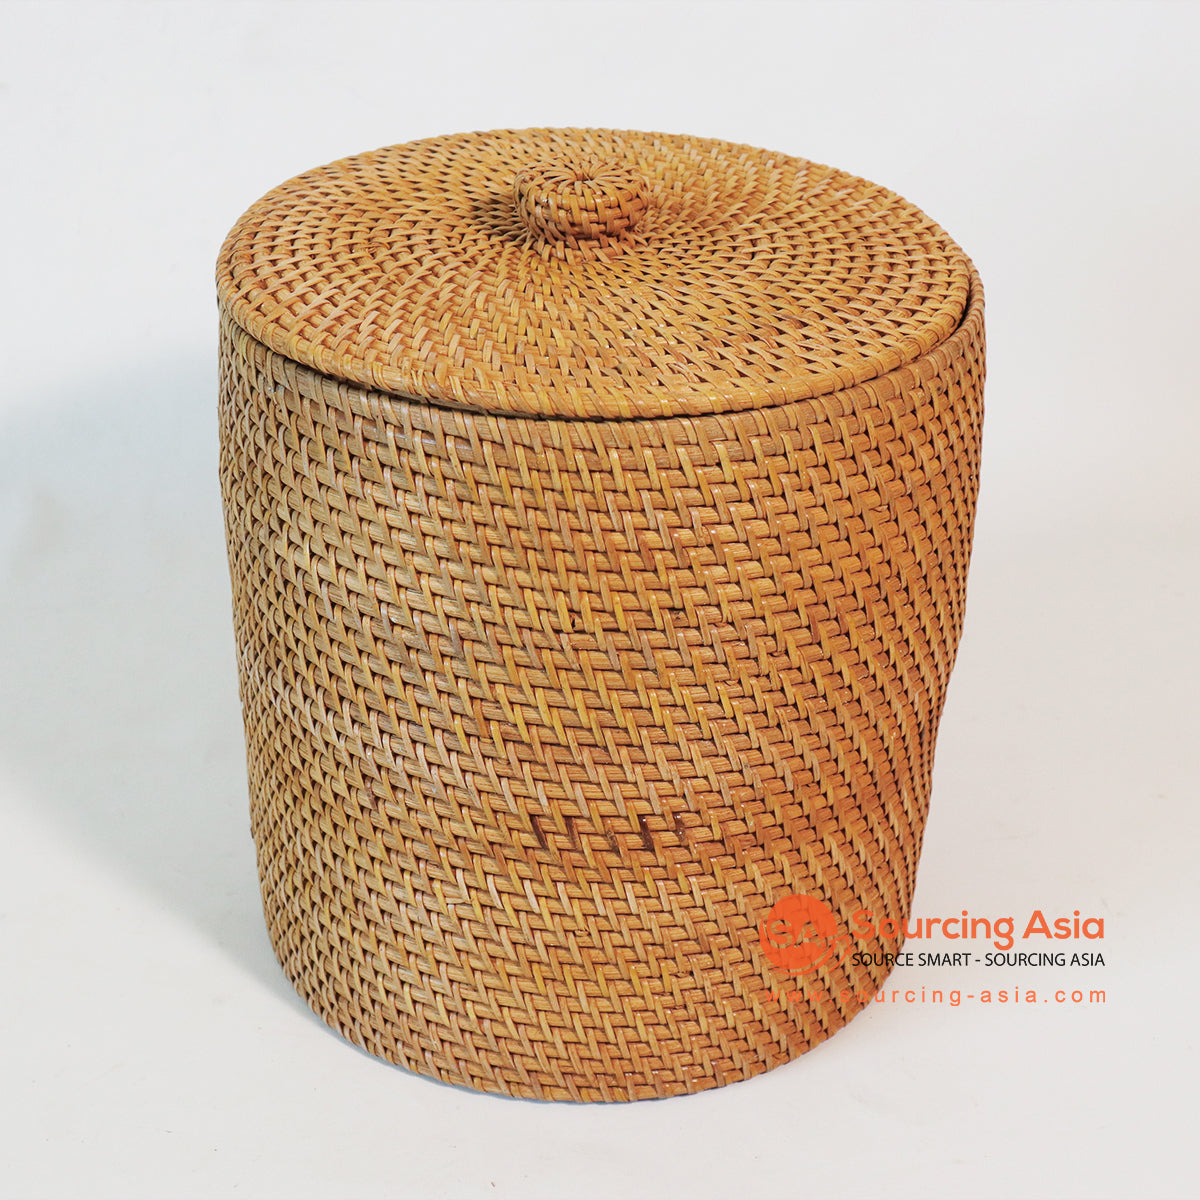 MTIC075 NATURAL WOVEN RATTAN WASTE PAPER BASKET WITH LID